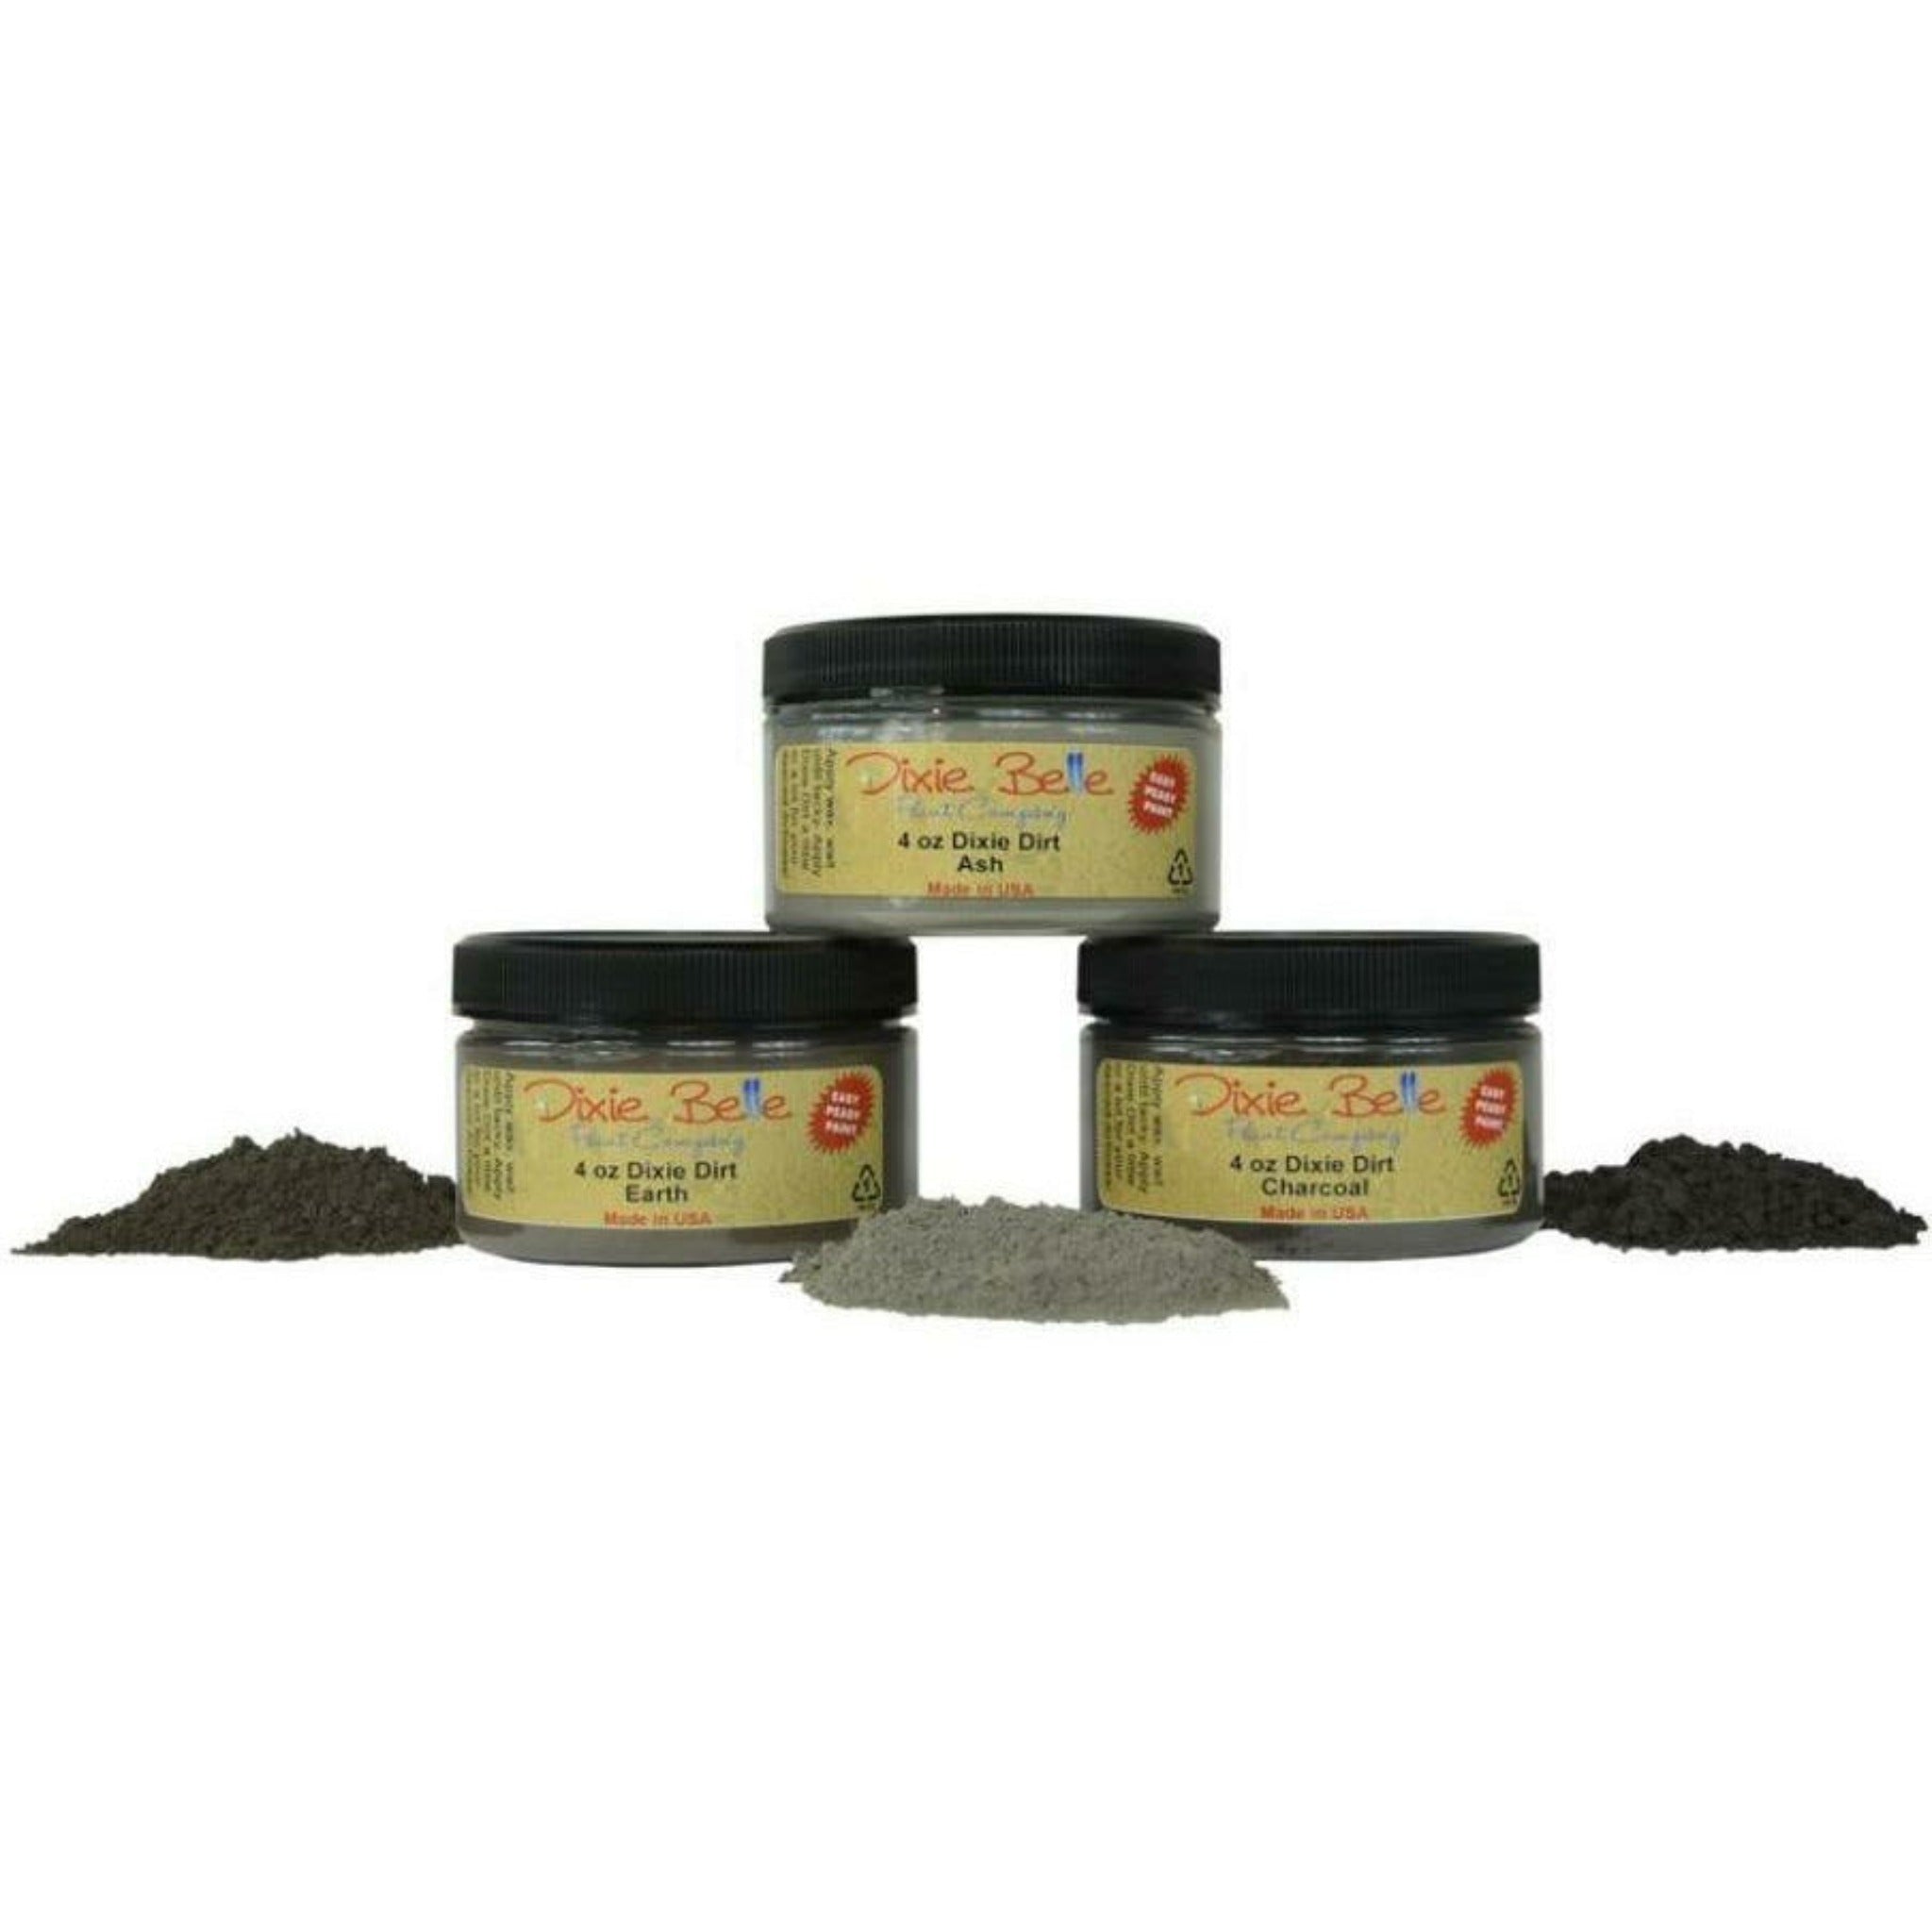 Three containers of Dixie Belle Paint Company's 4oz Dixie Dirt in Ash, Earth, and Charcoal are shown against a white background along with small piles of the product. These are loose pigments used to create shadowing and dimension to any furniture project.